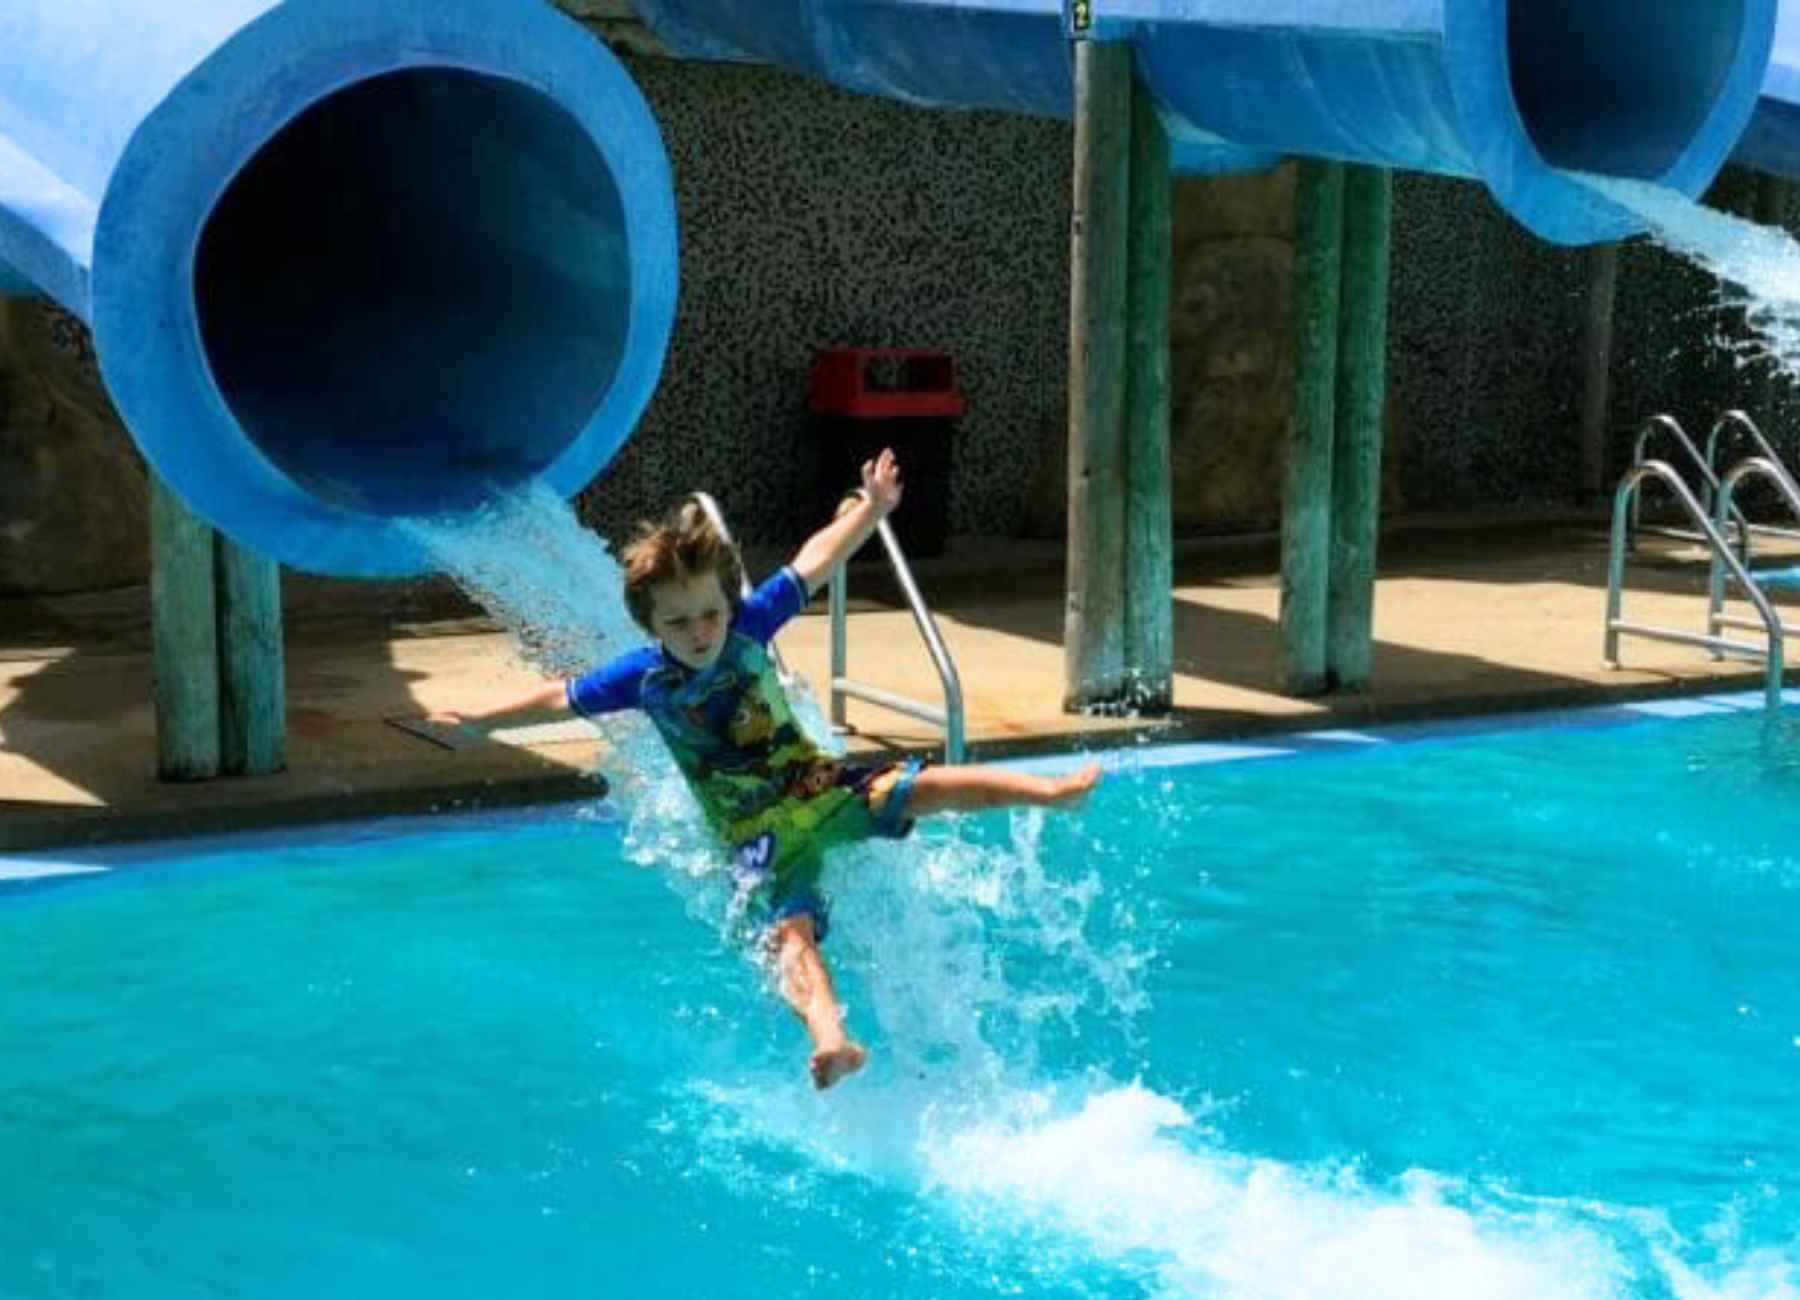 Knox going down the slide at Noahs Ark in Wisconsin Dells